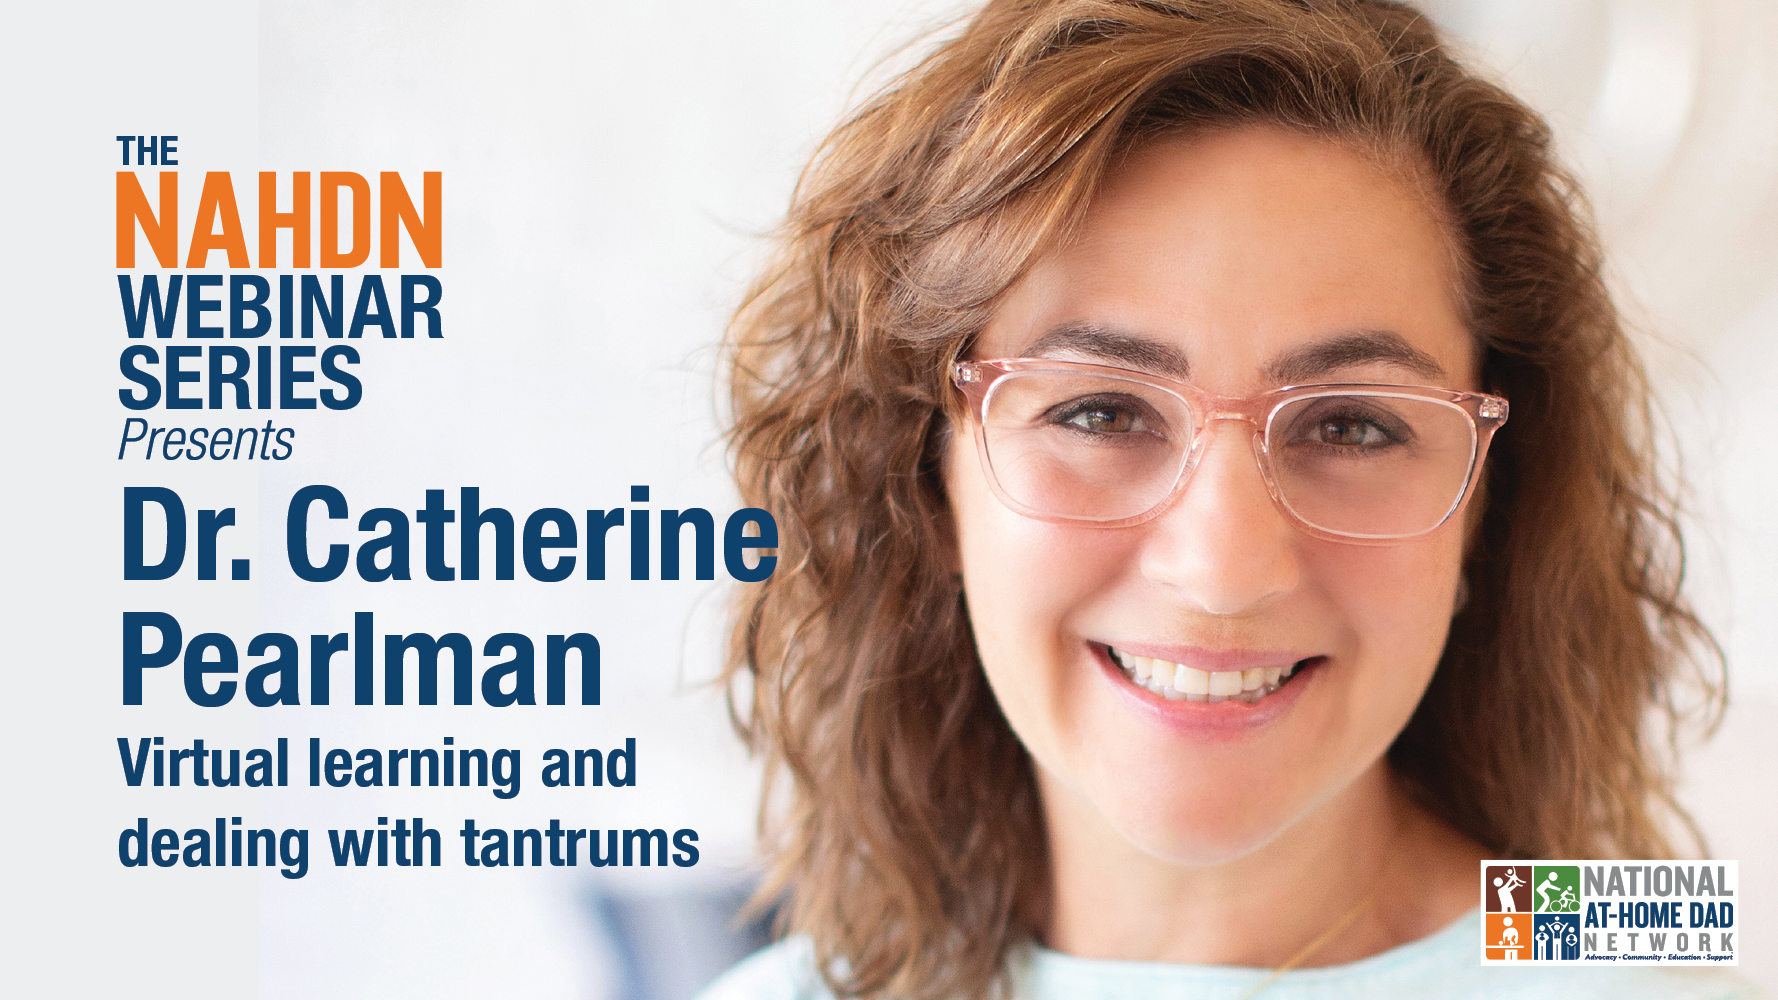 Dr. Catherine Pearlman - Strategies to help kids focus on virtual learning and dealing with tantrums